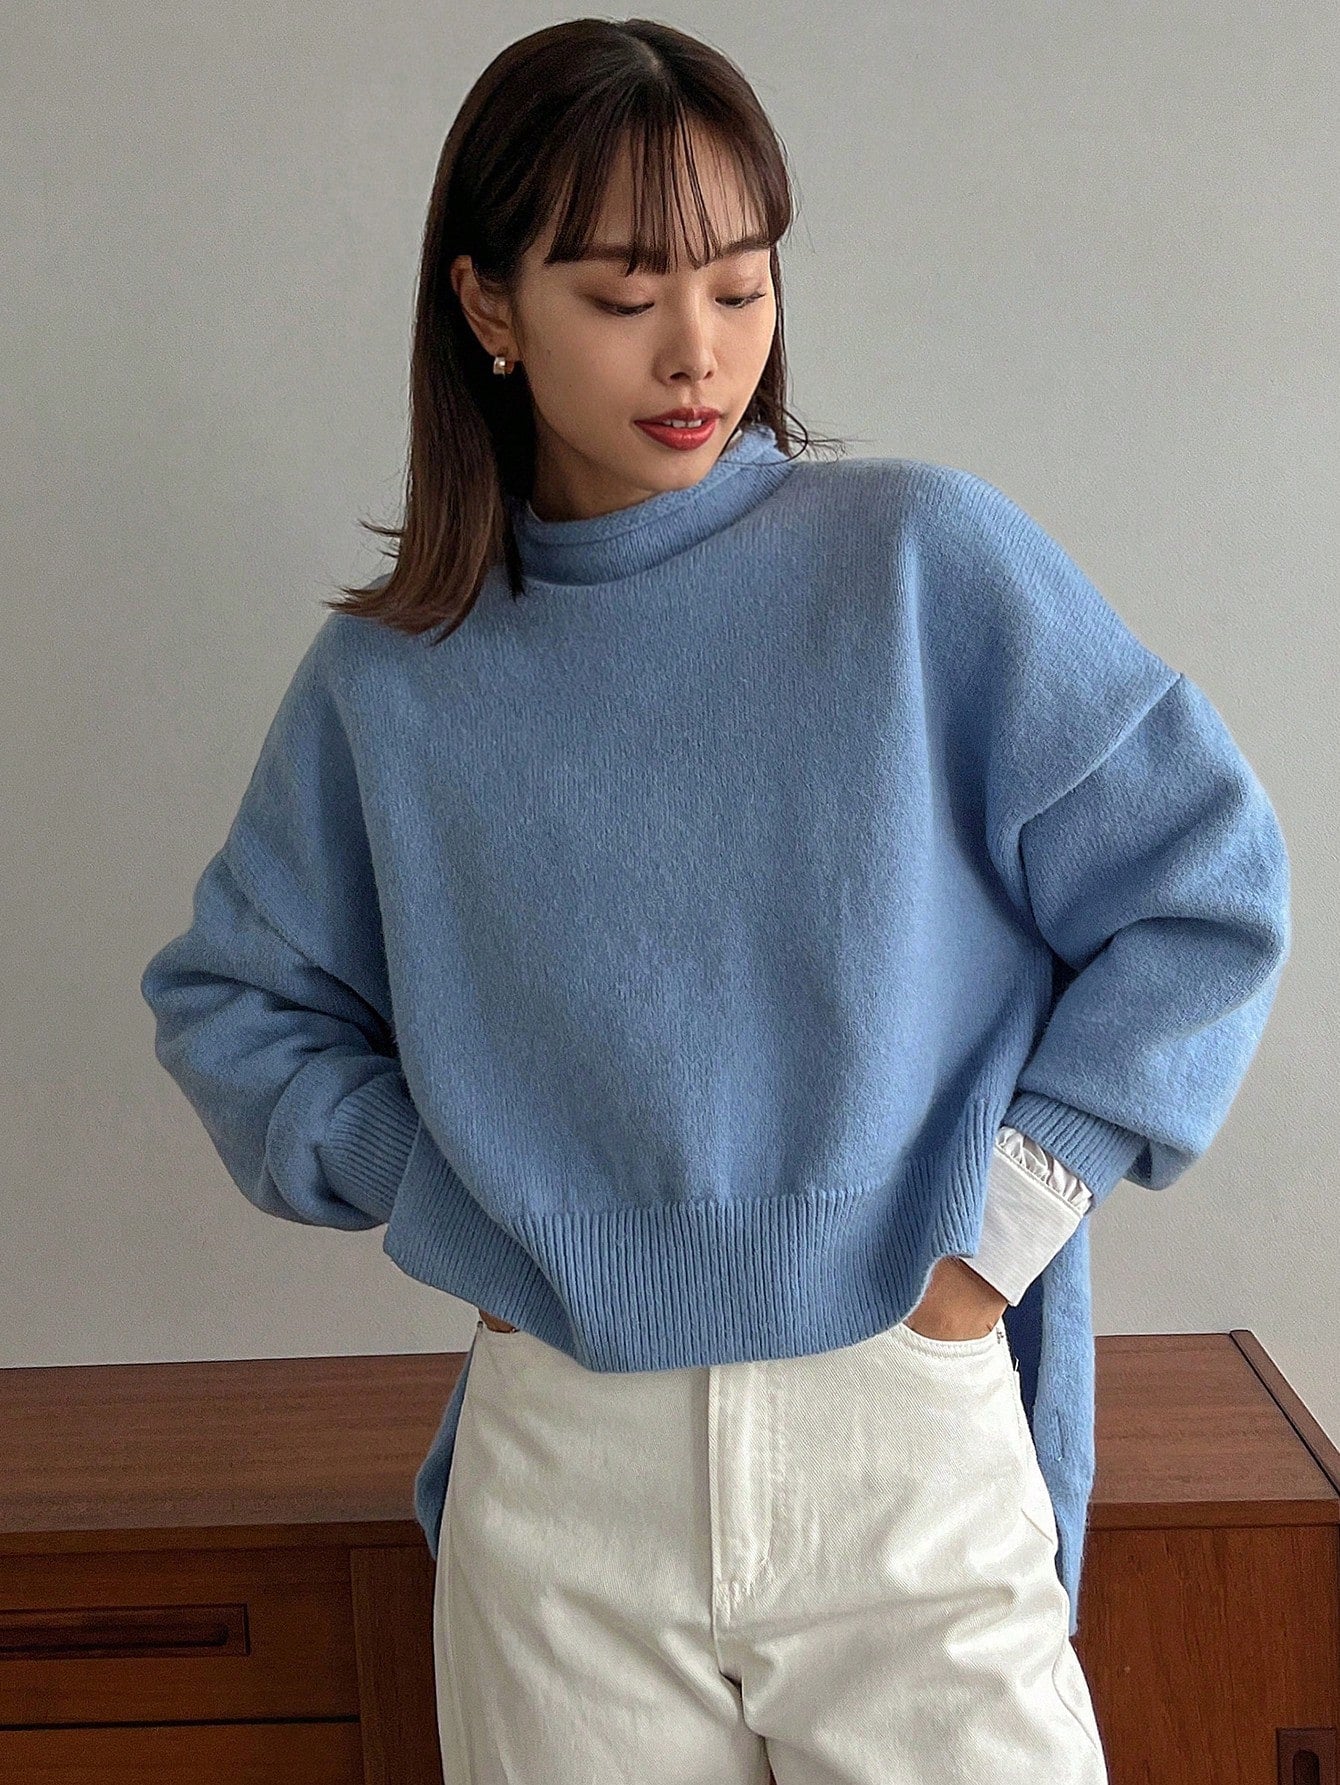 Women's Blue Casual Knit Sweater With Short Front And Long Back